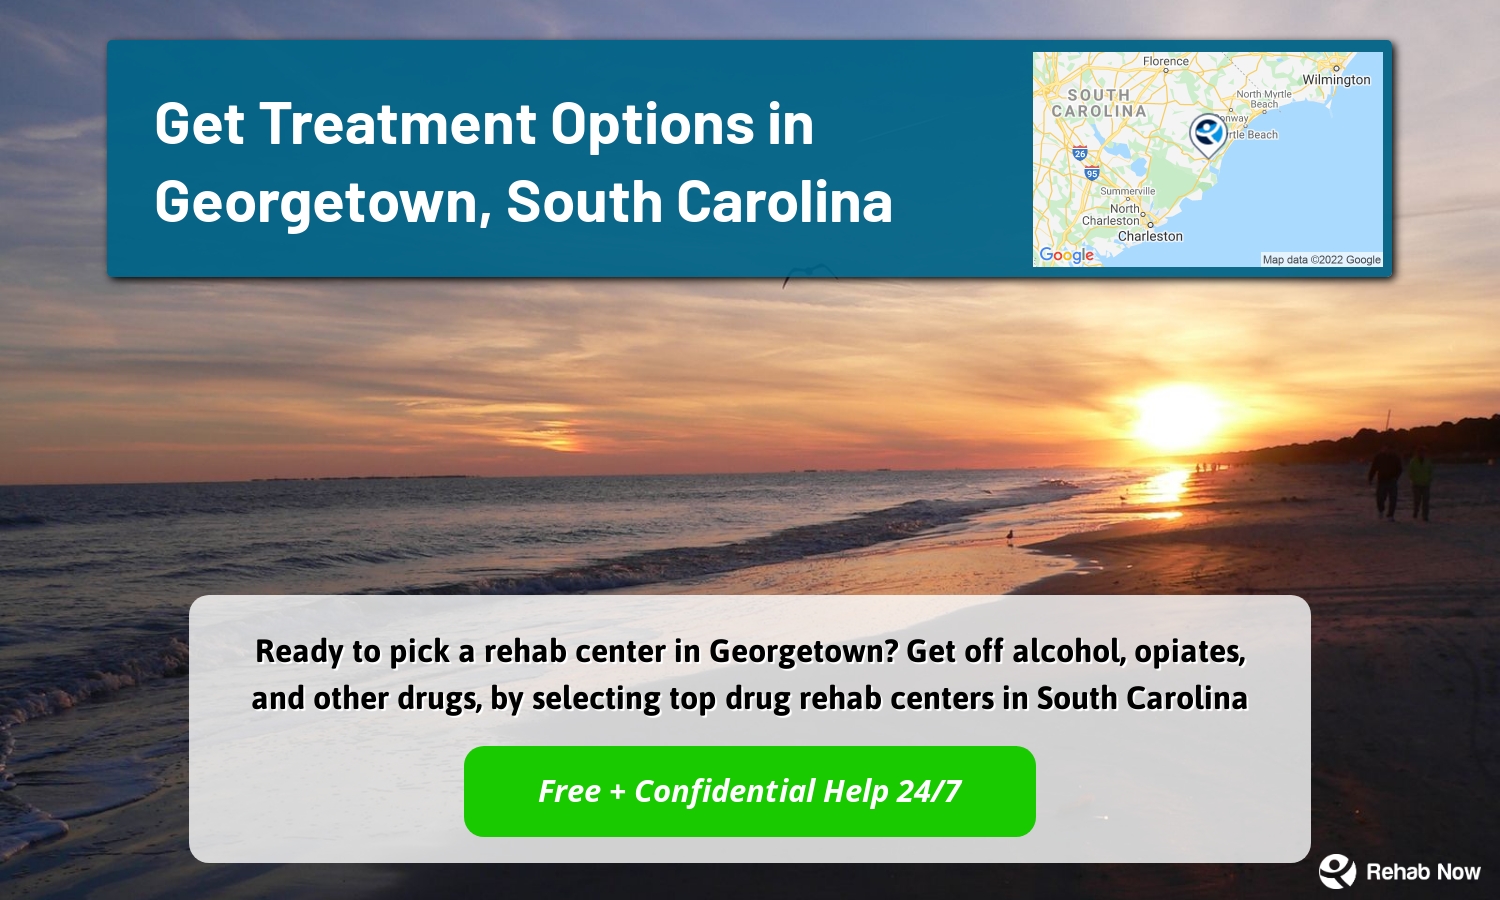 Ready to pick a rehab center in Georgetown? Get off alcohol, opiates, and other drugs, by selecting top drug rehab centers in South Carolina